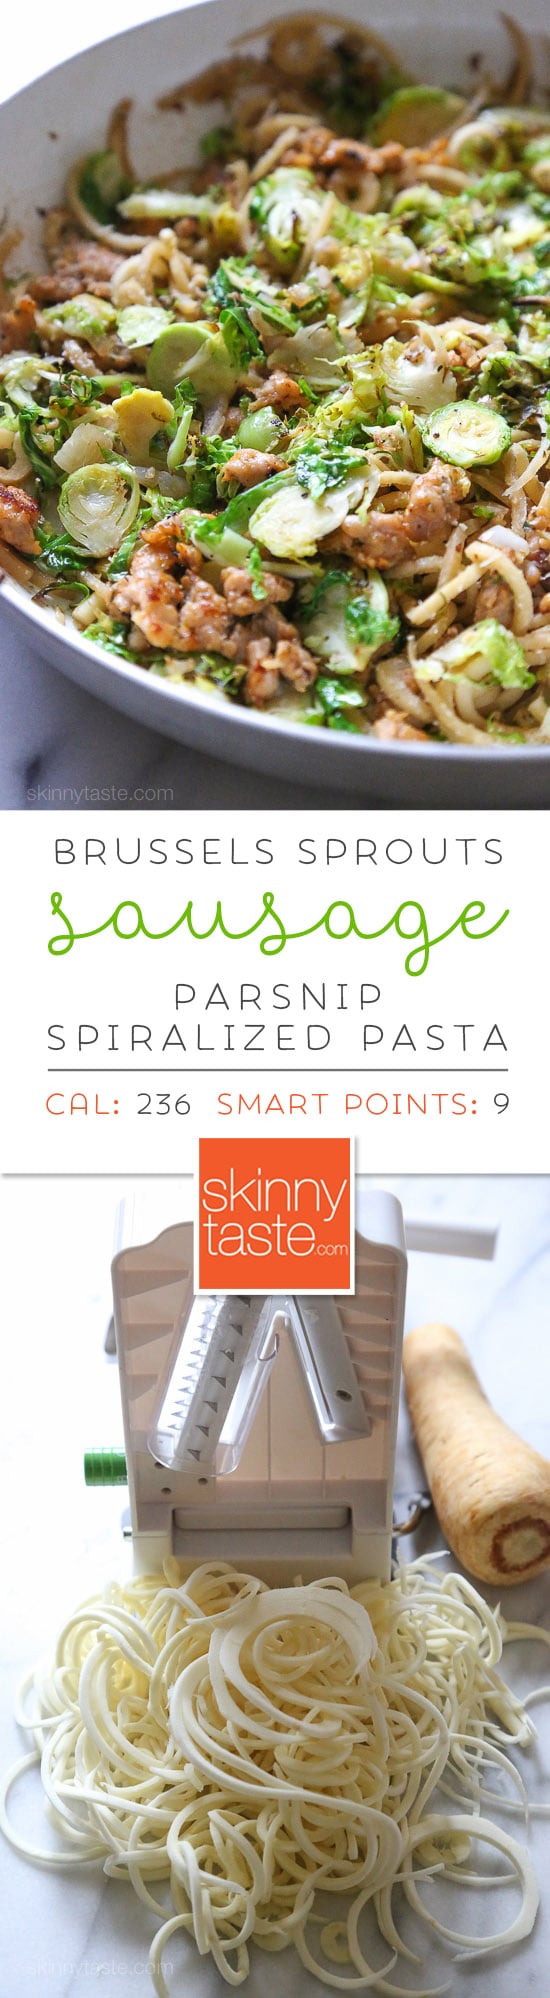 Spiralized parsnips make a wonderful pasta replacement in this satisfying, spicy Autumn dish made with brussels sprouts and spicy chicken sausage.